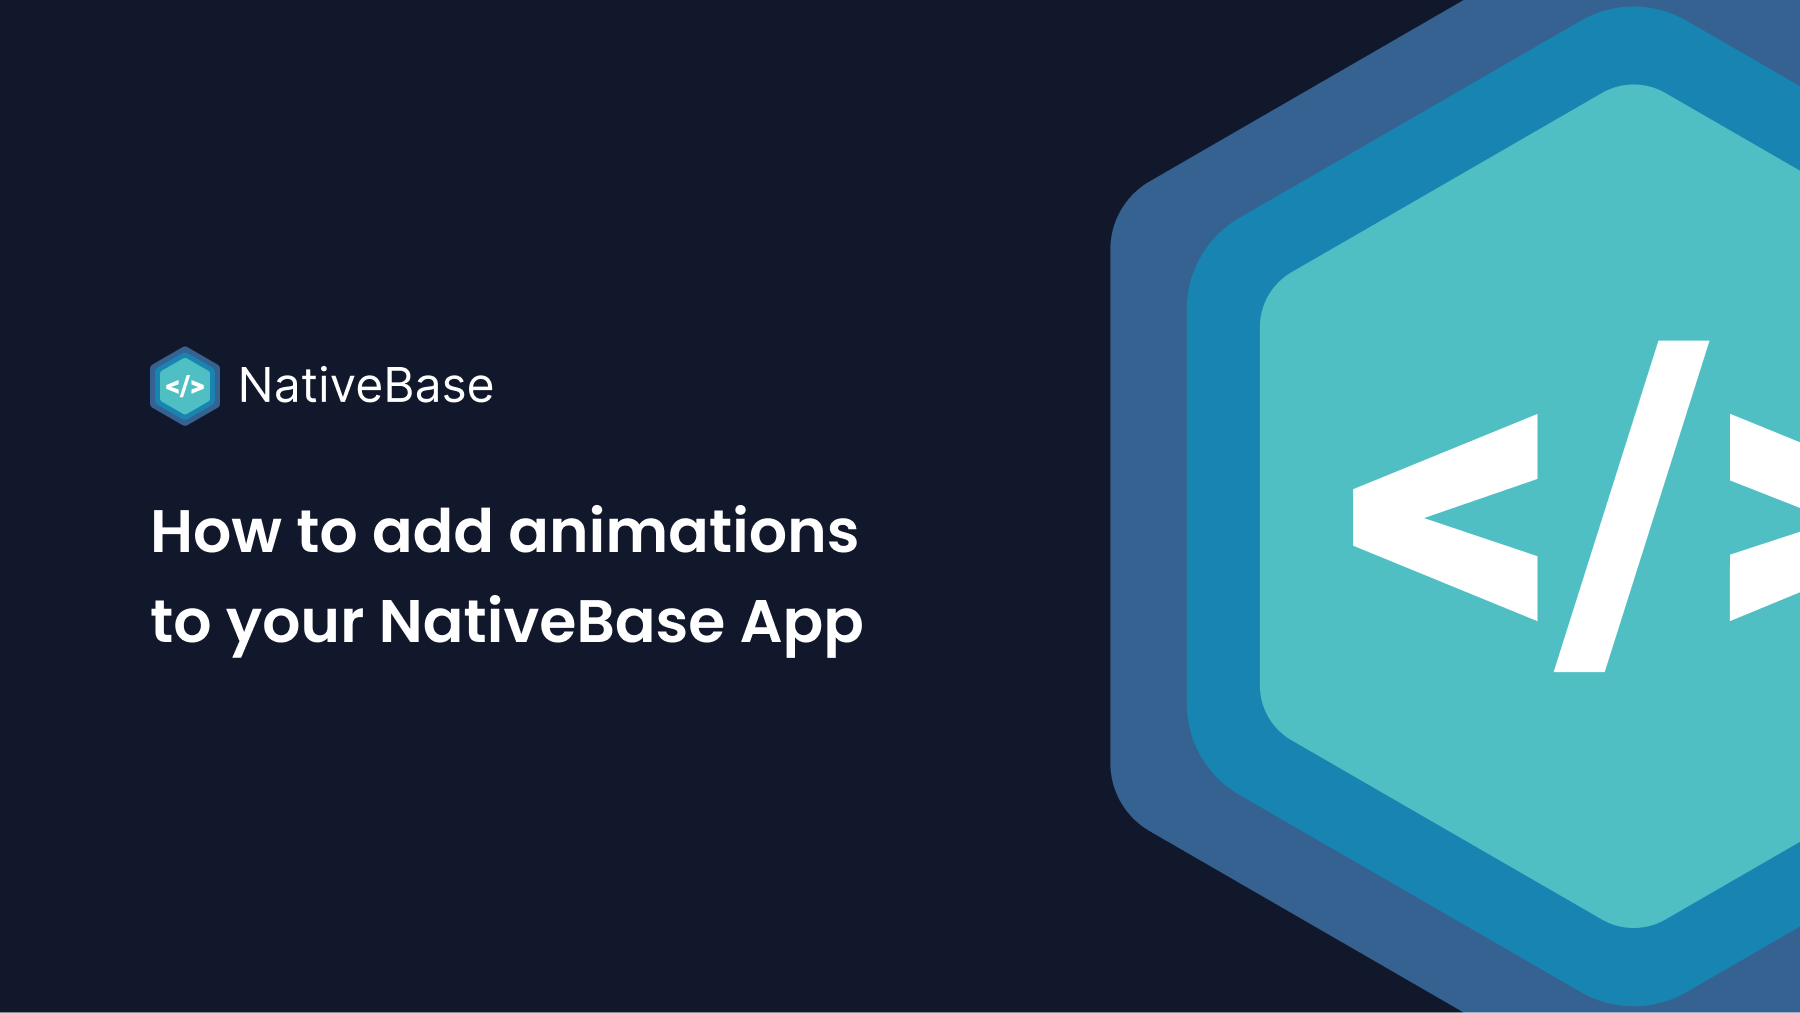 How to add animations to your NativeBase App